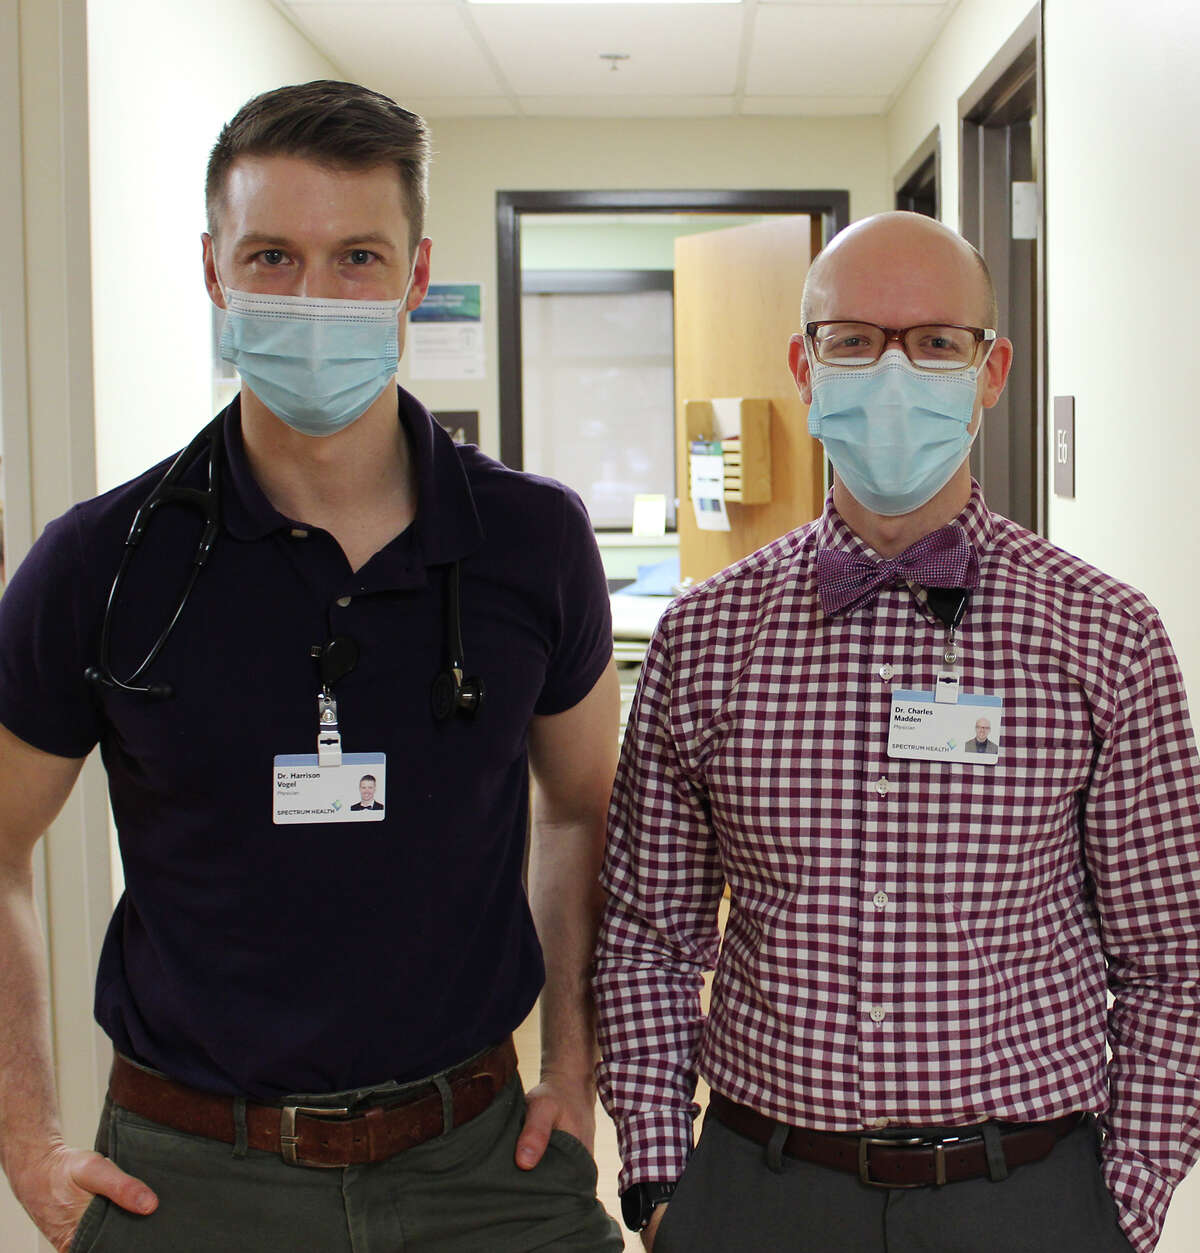 Drs. Harrison Vogel and Charles Madden started at Spectrum Health Big Rapids in August 2021.